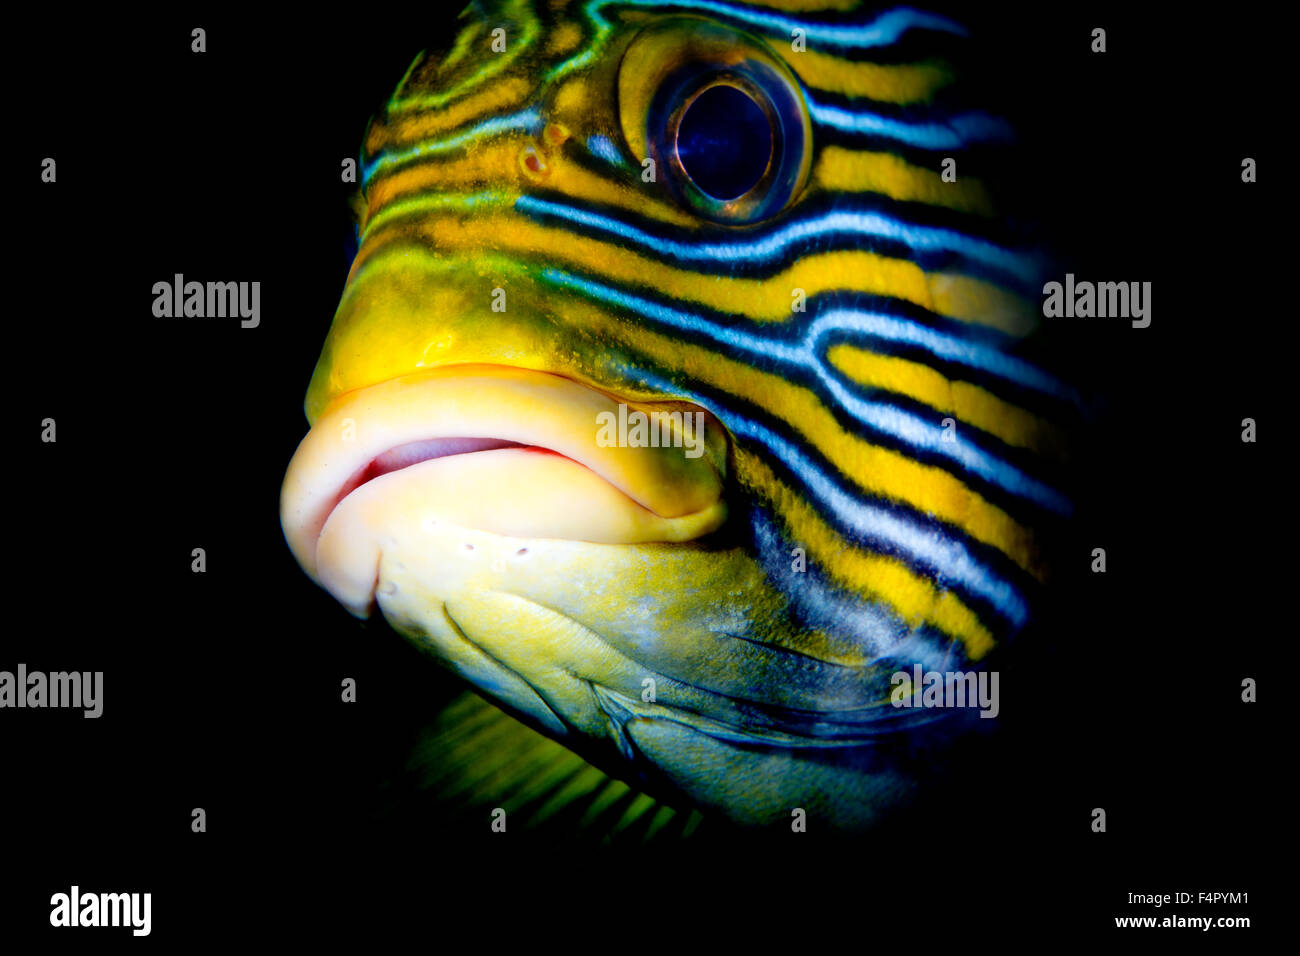 Detail of Brightly Colored Oriental Sweetlips Fish's Face Looking at Camera. Appearing Our of the Darkness Stock Photo